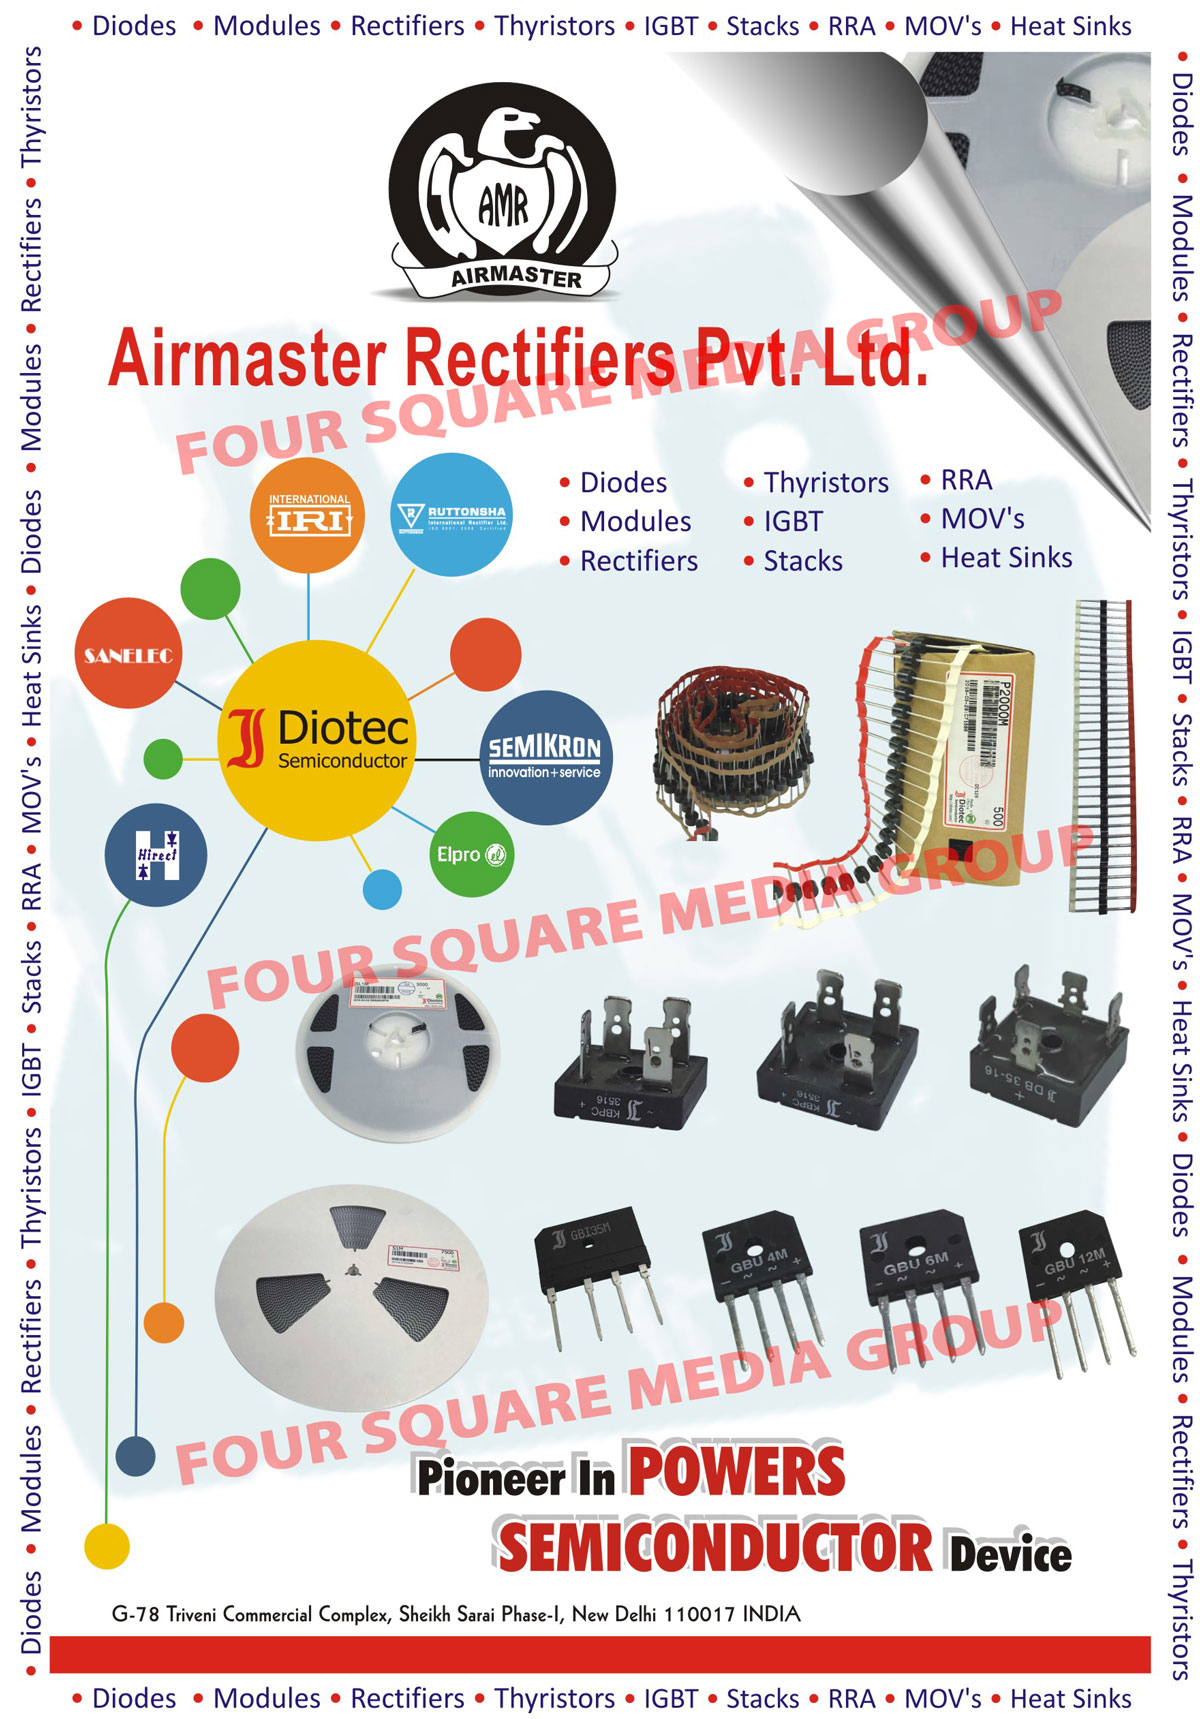 Power Semiconductor Devices, Diodes, Modules, Rectifiers, Thyristors, Igbt, Stacks, Heat Sinks, Power Diode Capsules, Bridge Rectifiers, Top Hat Diodes, Temperature Switches, Thyristor Modules, RRA, MOV, IGBT Drivers, Stud Diodes, Flat Diodes, Capsule Diode Thyristors, SMD, Axial, AVR